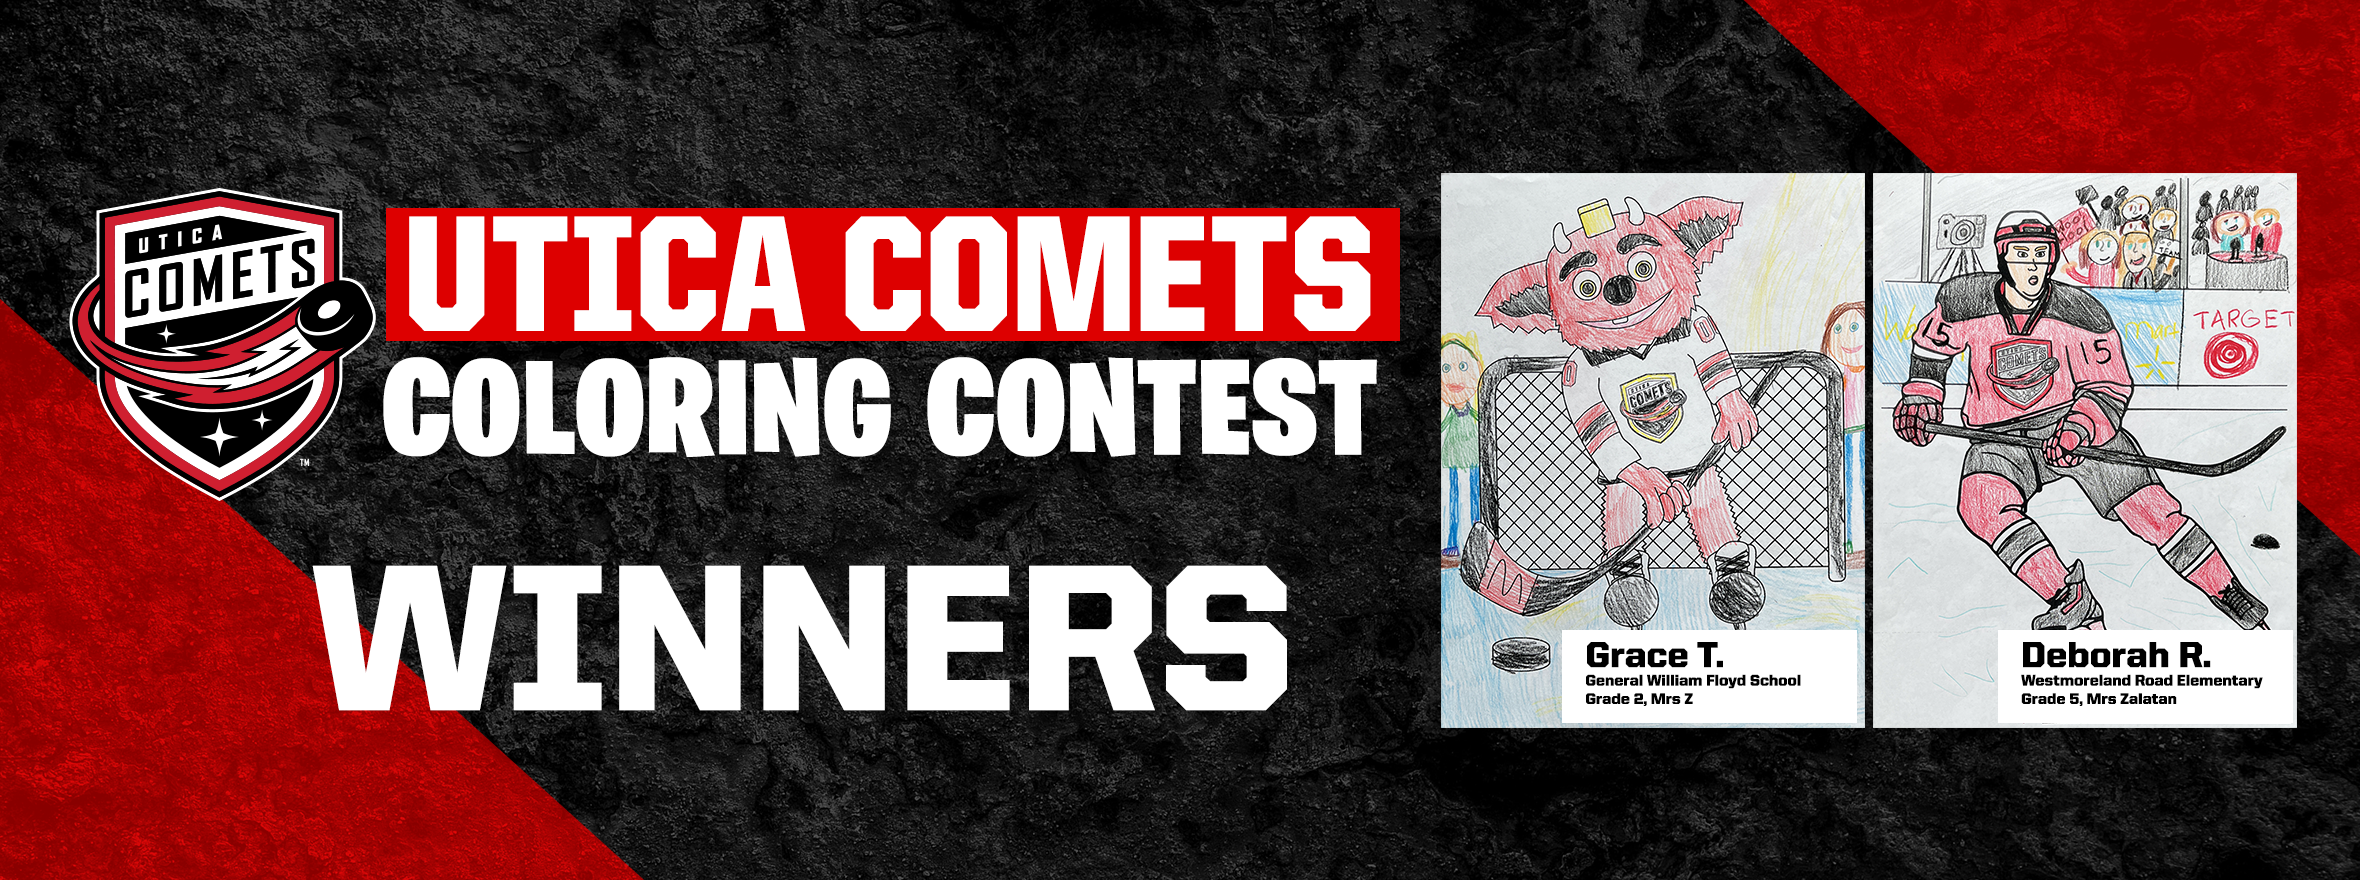 COMETS COLORING CONTEST WINNERS ANNOUNCED